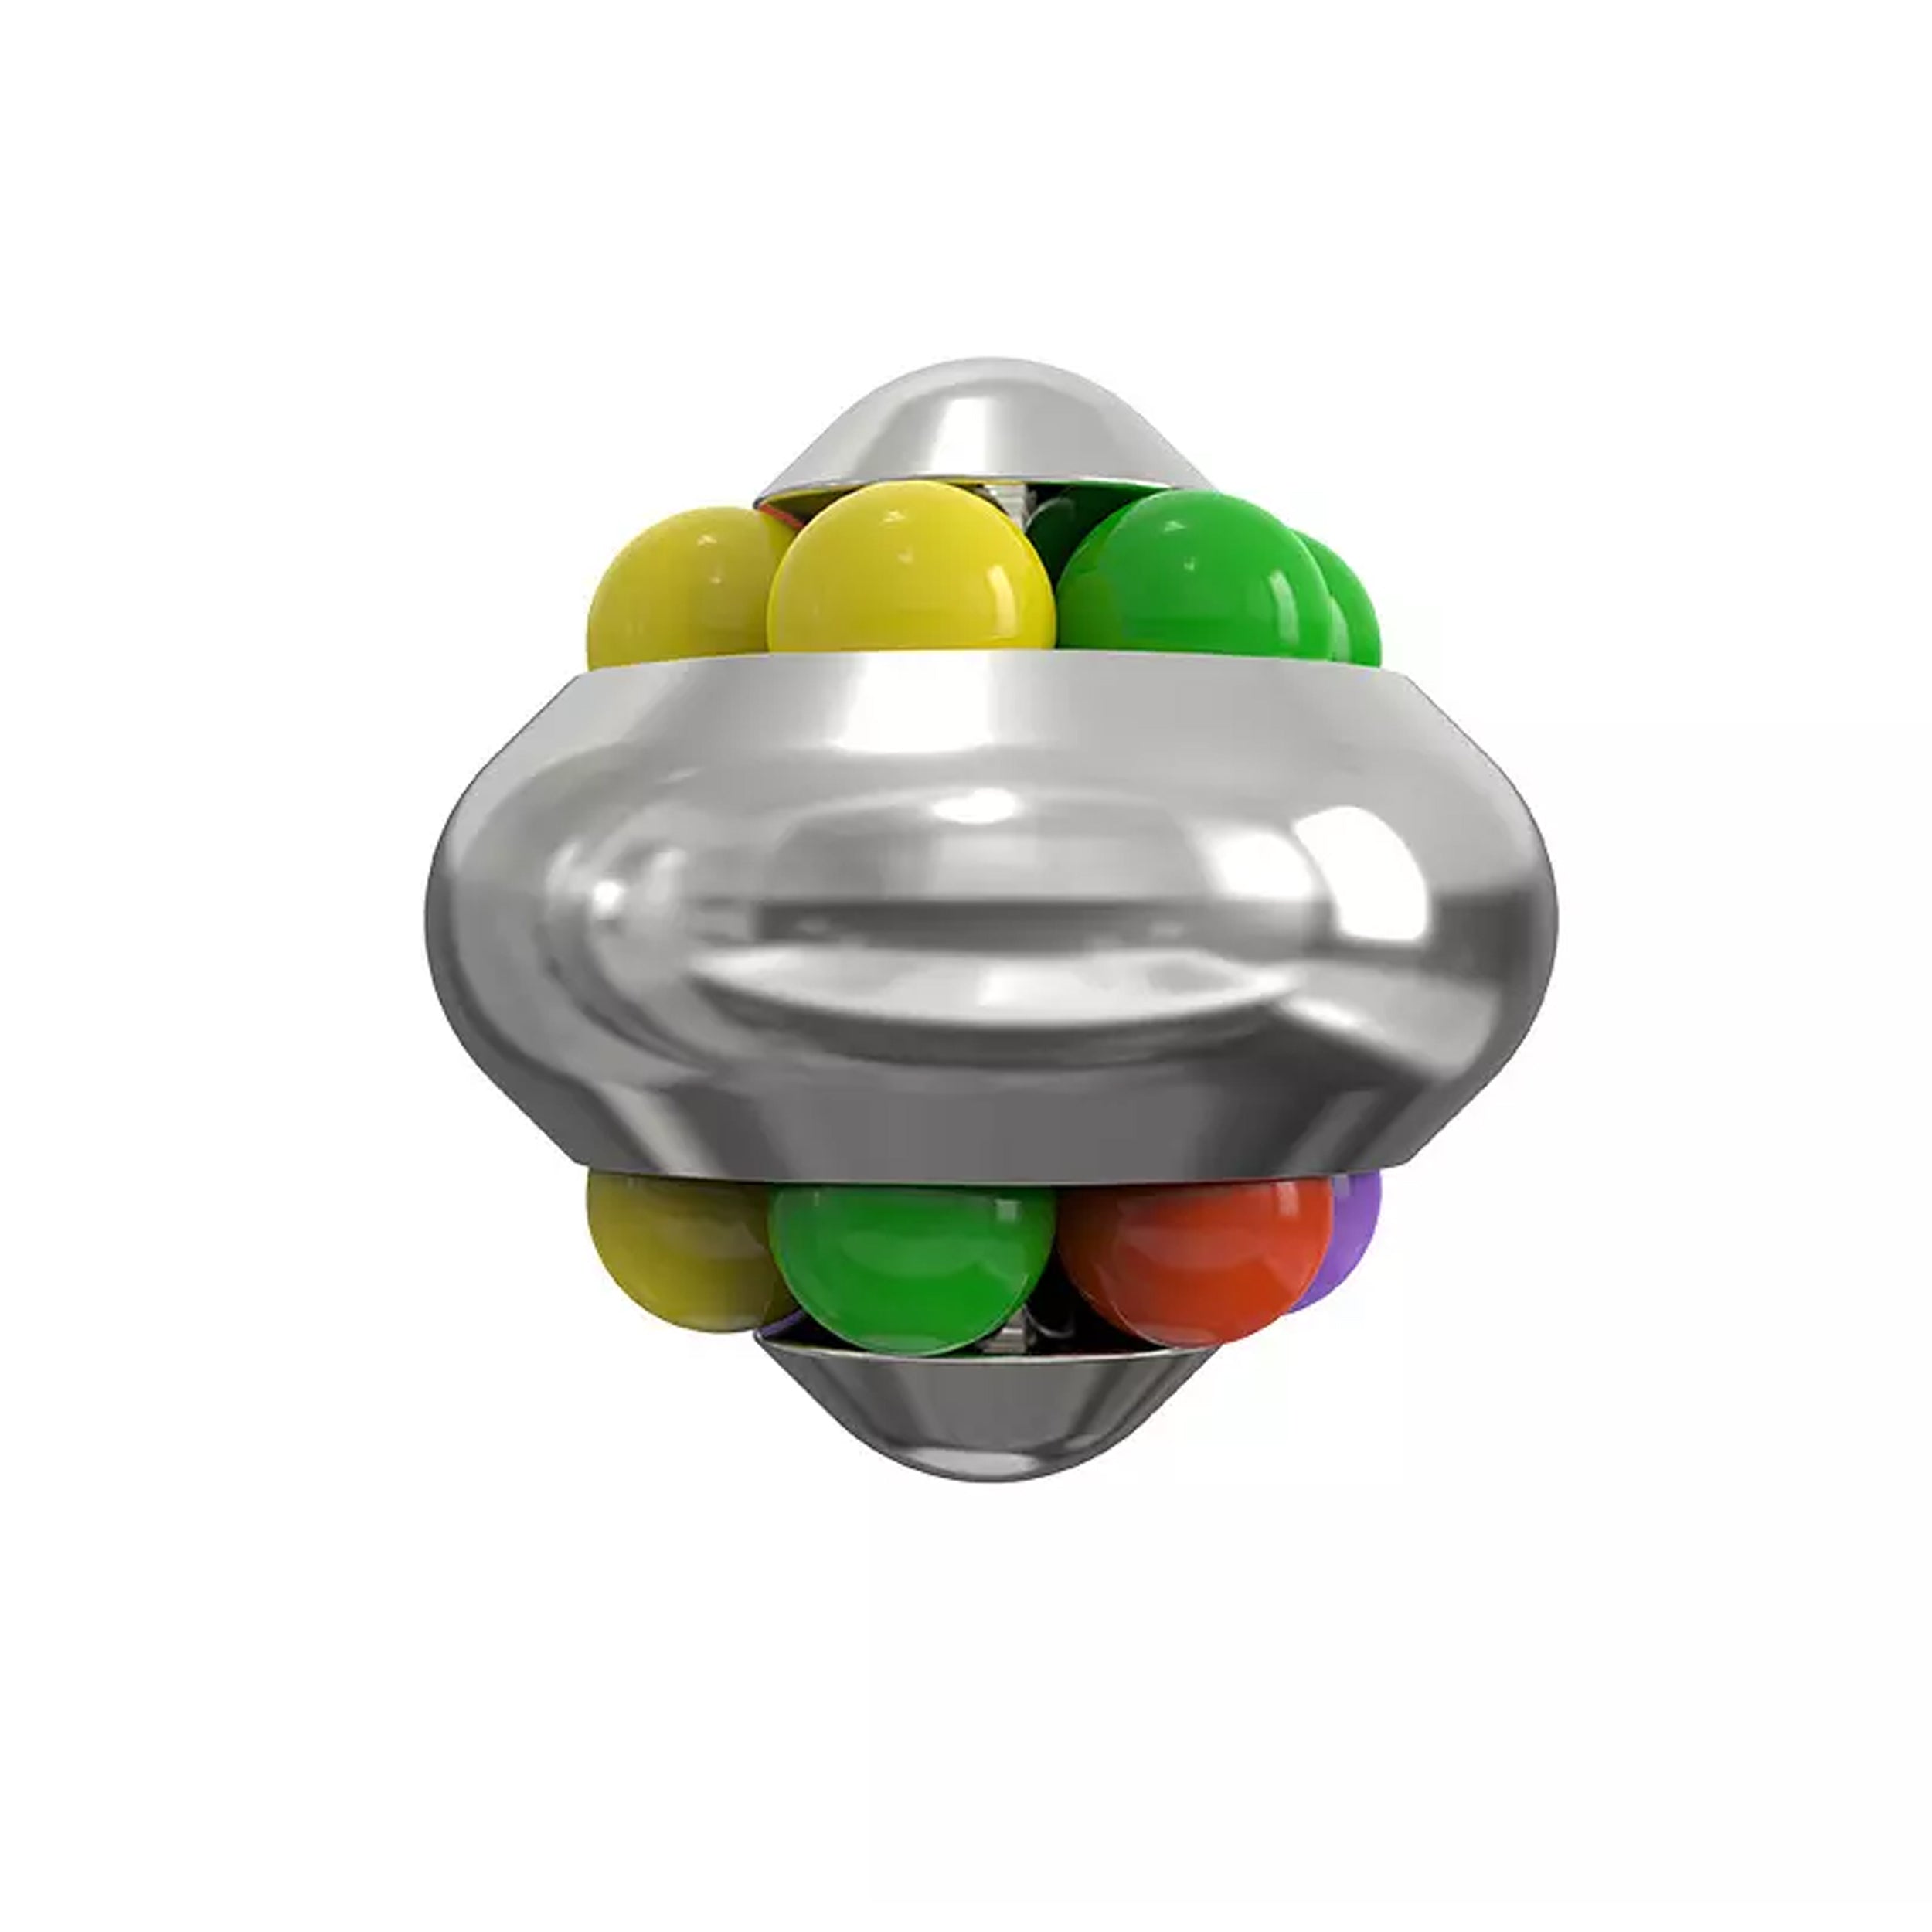 Get Your Hands on the Magic with our Colorful Aluminum Alloy Fidget Toy